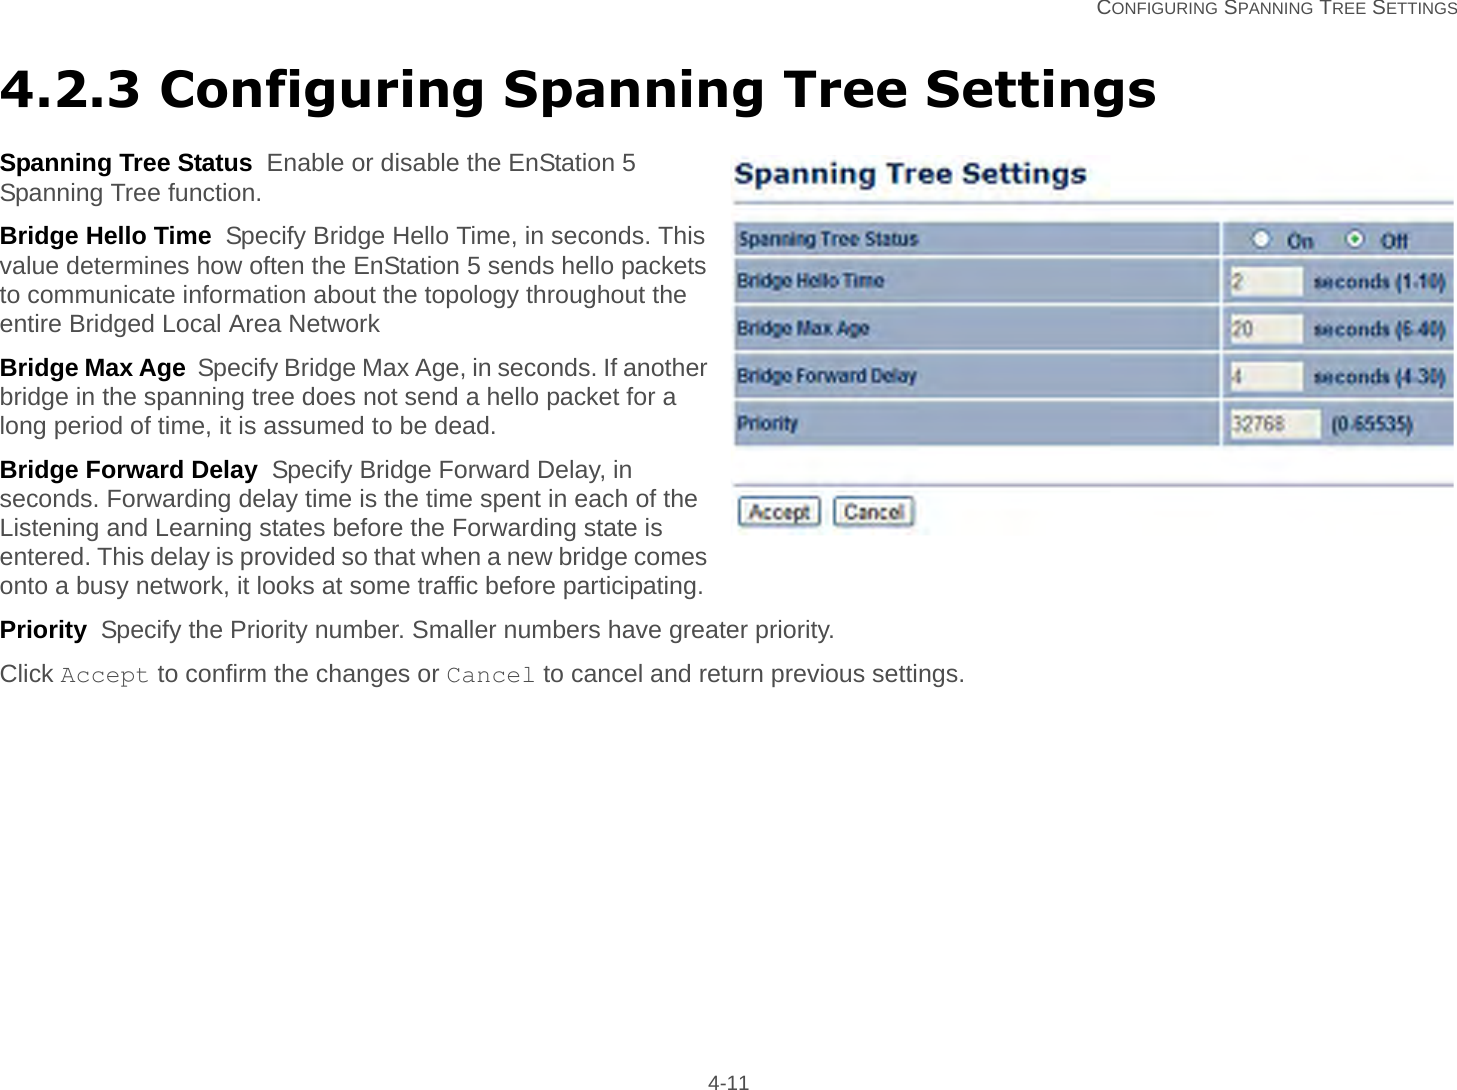   CONFIGURING SPANNING TREE SETTINGS 4-114.2.3 Configuring Spanning Tree SettingsSpanning Tree Status  Enable or disable the EnStation 5 Spanning Tree function.Bridge Hello Time  Specify Bridge Hello Time, in seconds. This value determines how often the EnStation 5 sends hello packets to communicate information about the topology throughout the entire Bridged Local Area NetworkBridge Max Age  Specify Bridge Max Age, in seconds. If another bridge in the spanning tree does not send a hello packet for a long period of time, it is assumed to be dead.Bridge Forward Delay  Specify Bridge Forward Delay, in seconds. Forwarding delay time is the time spent in each of the Listening and Learning states before the Forwarding state is entered. This delay is provided so that when a new bridge comes onto a busy network, it looks at some traffic before participating.Priority  Specify the Priority number. Smaller numbers have greater priority.Click Accept to confirm the changes or Cancel to cancel and return previous settings.